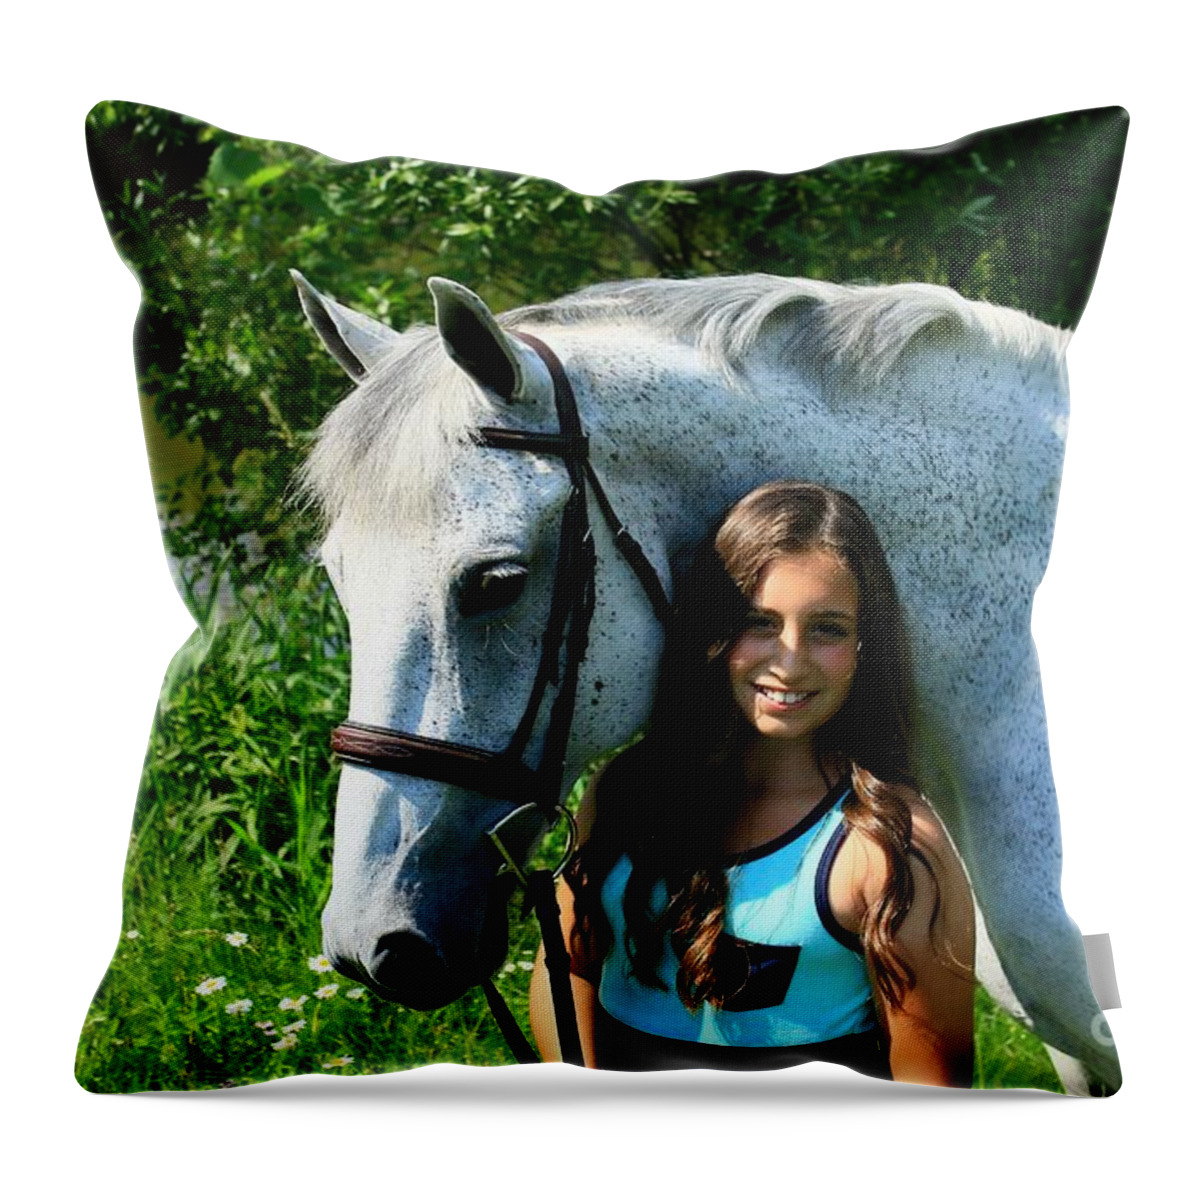  Throw Pillow featuring the photograph Vanessa-Ireland36 by Life With Horses